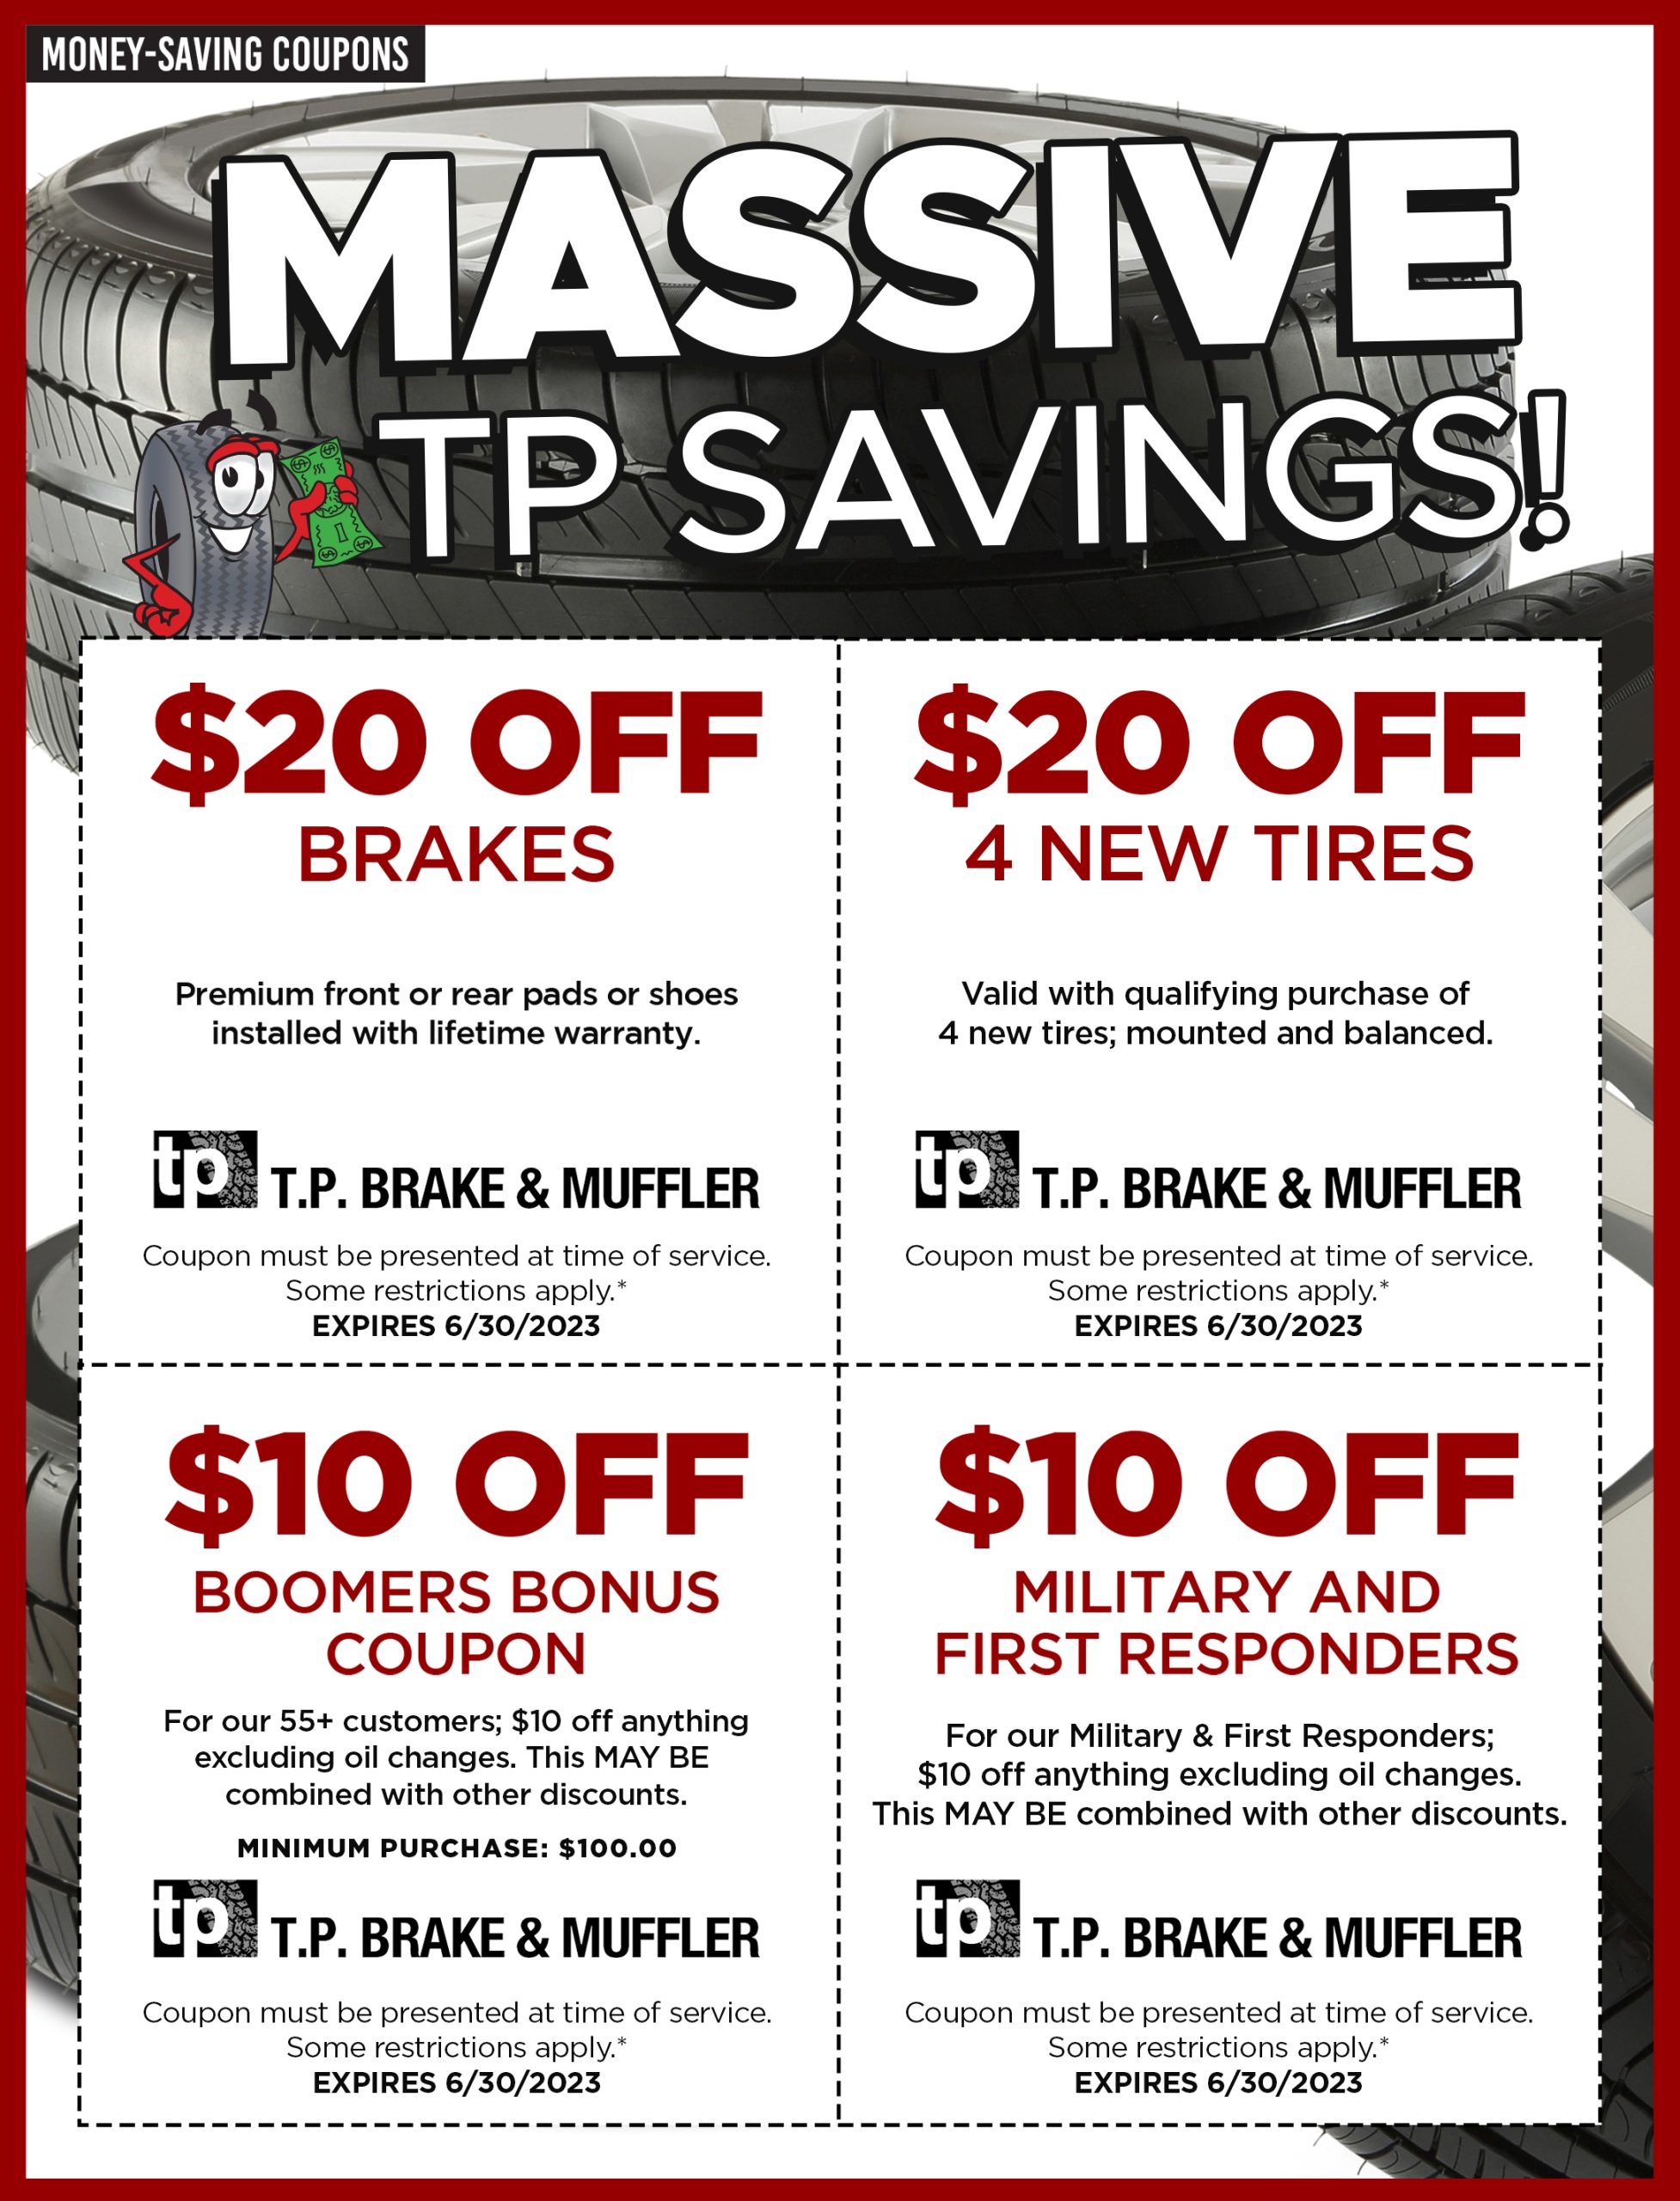 Tire and Auto Service Coupons TP Brake & Muffler Utica and Rome, NY